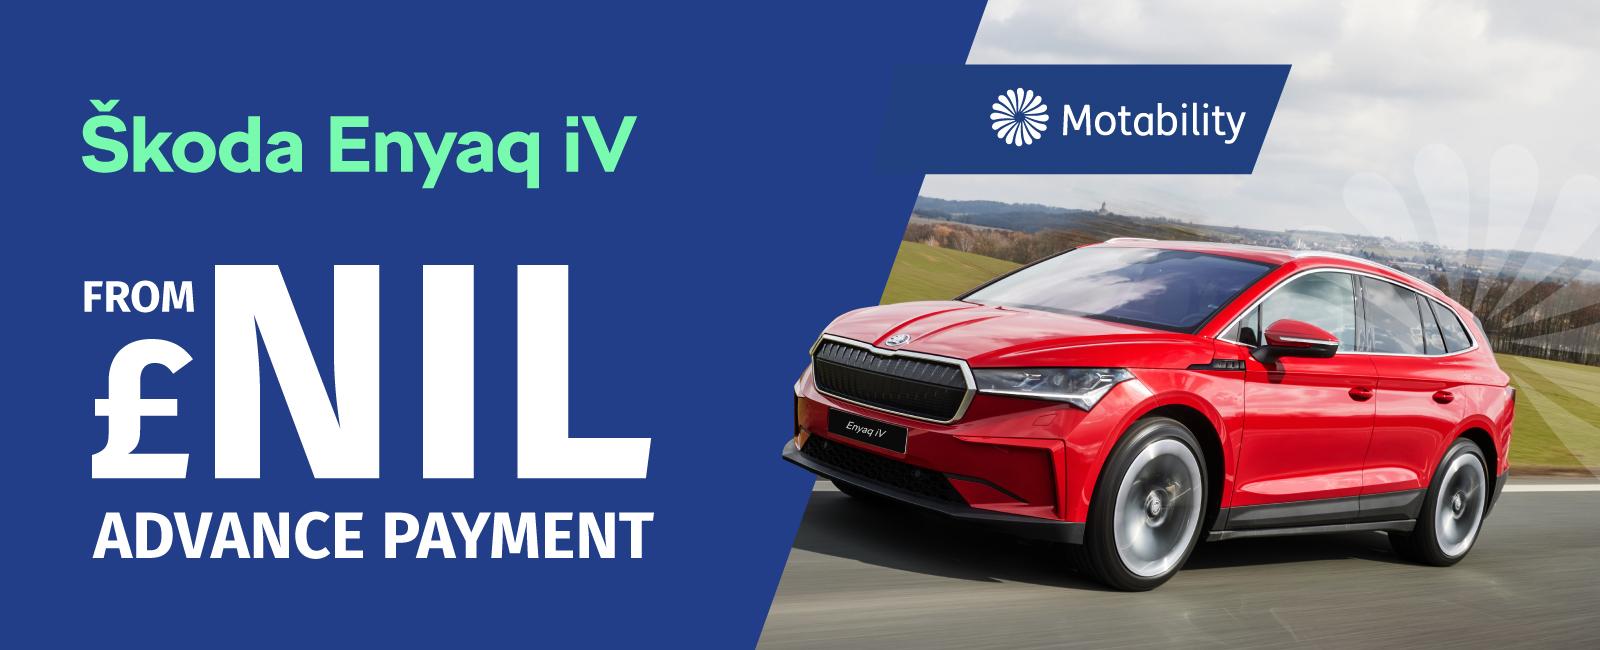 The Skoda Enyaq from £NIL advance payment on the Motability Scheme